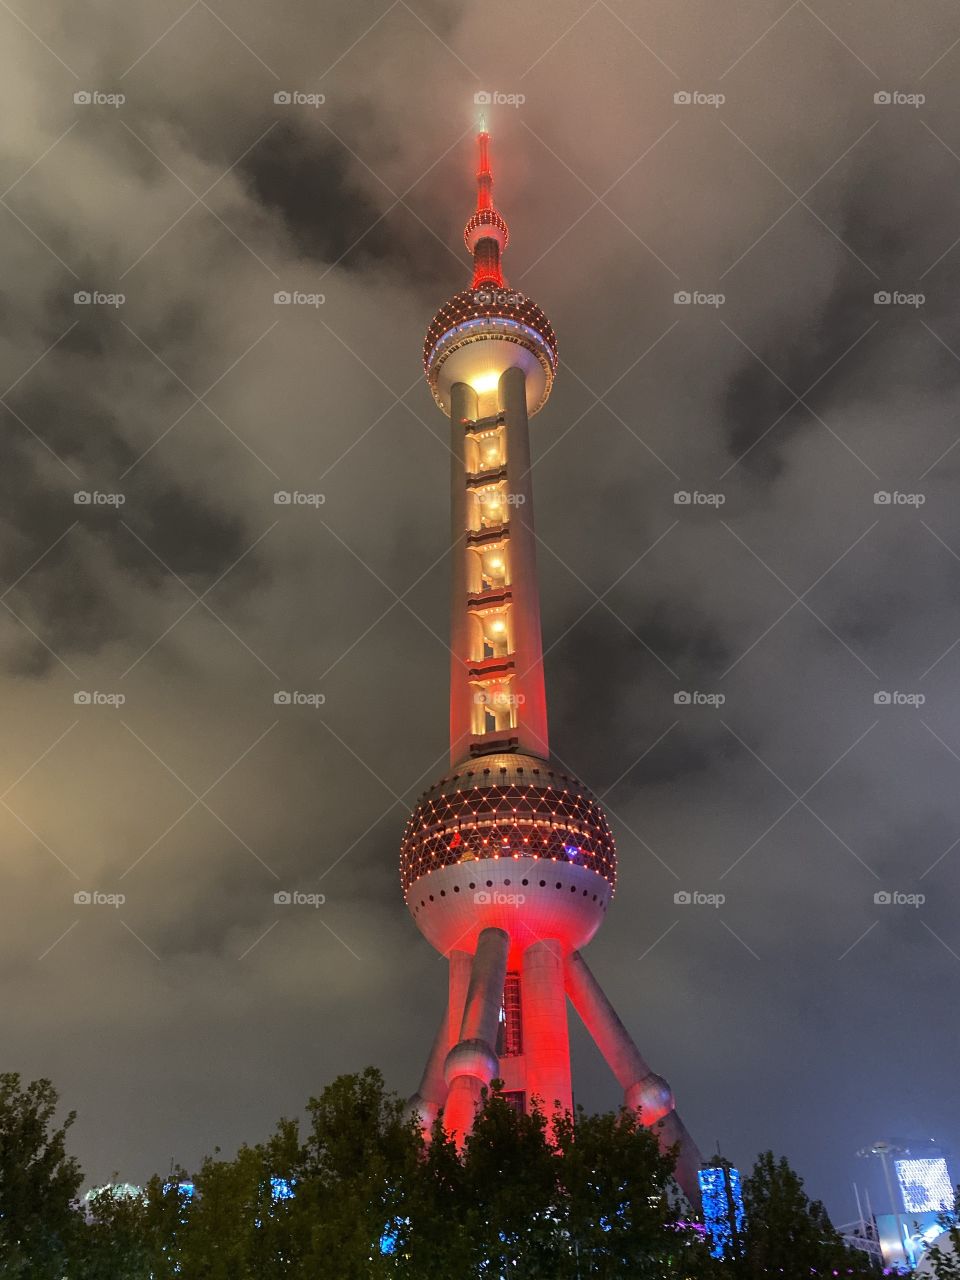 China National Day - this year it is the 70th anniversary - and of course a big celebration; Shanghai does not have fireworks but the strobe lights and building lights compensate for sure